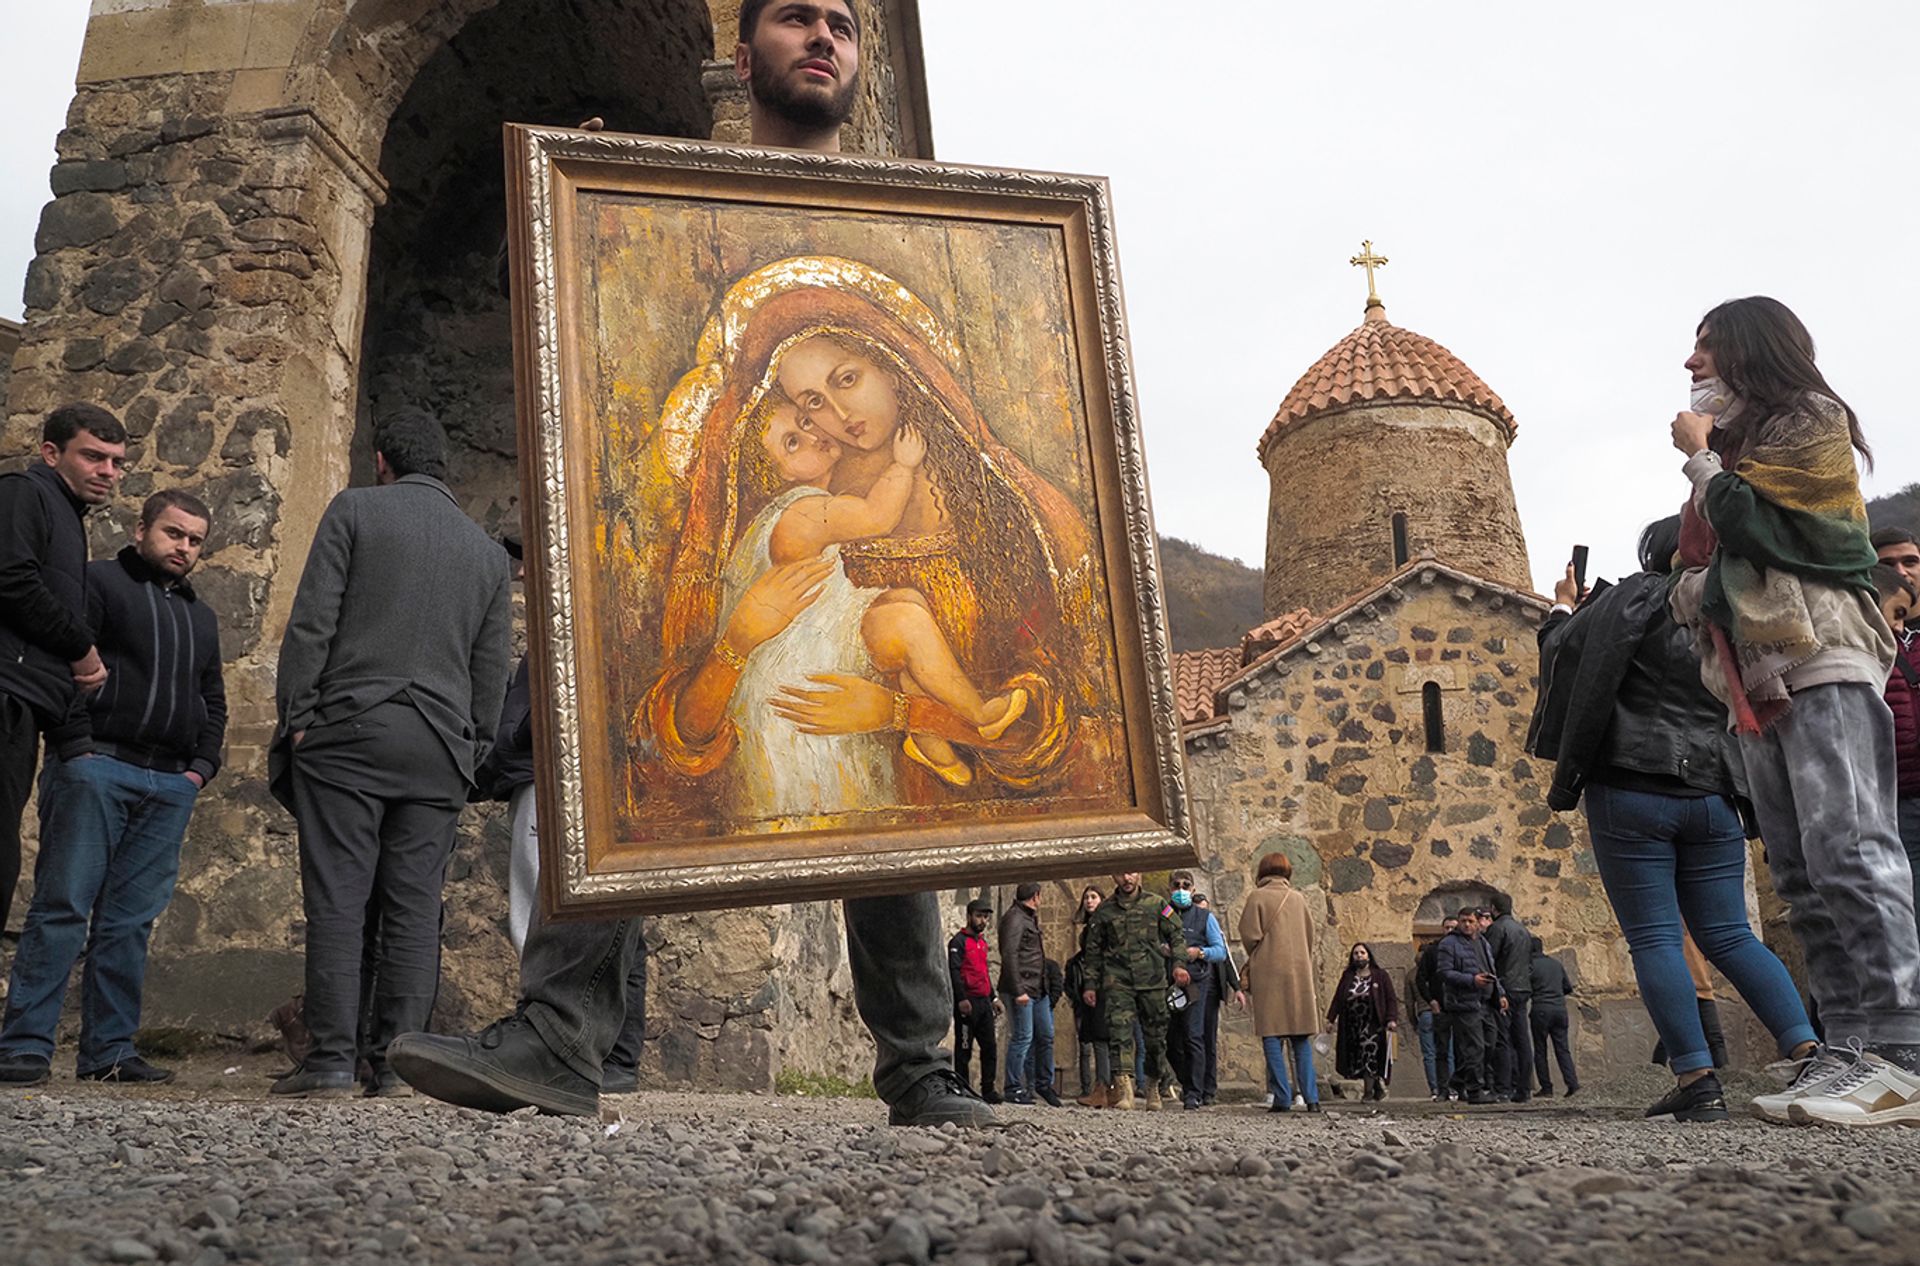 A man held an icon from the Dadivank, an Armenian Apostolic Church monastery dating to the ninth century in the district of Kalbajar, as ethnic Armenians prepared to leave on 14 November. The district is being turned over to Azerbaijan as part of a Russian-brokered peace accord to end six weeks of fighting in Nagorno-Karabakh. Associated Press